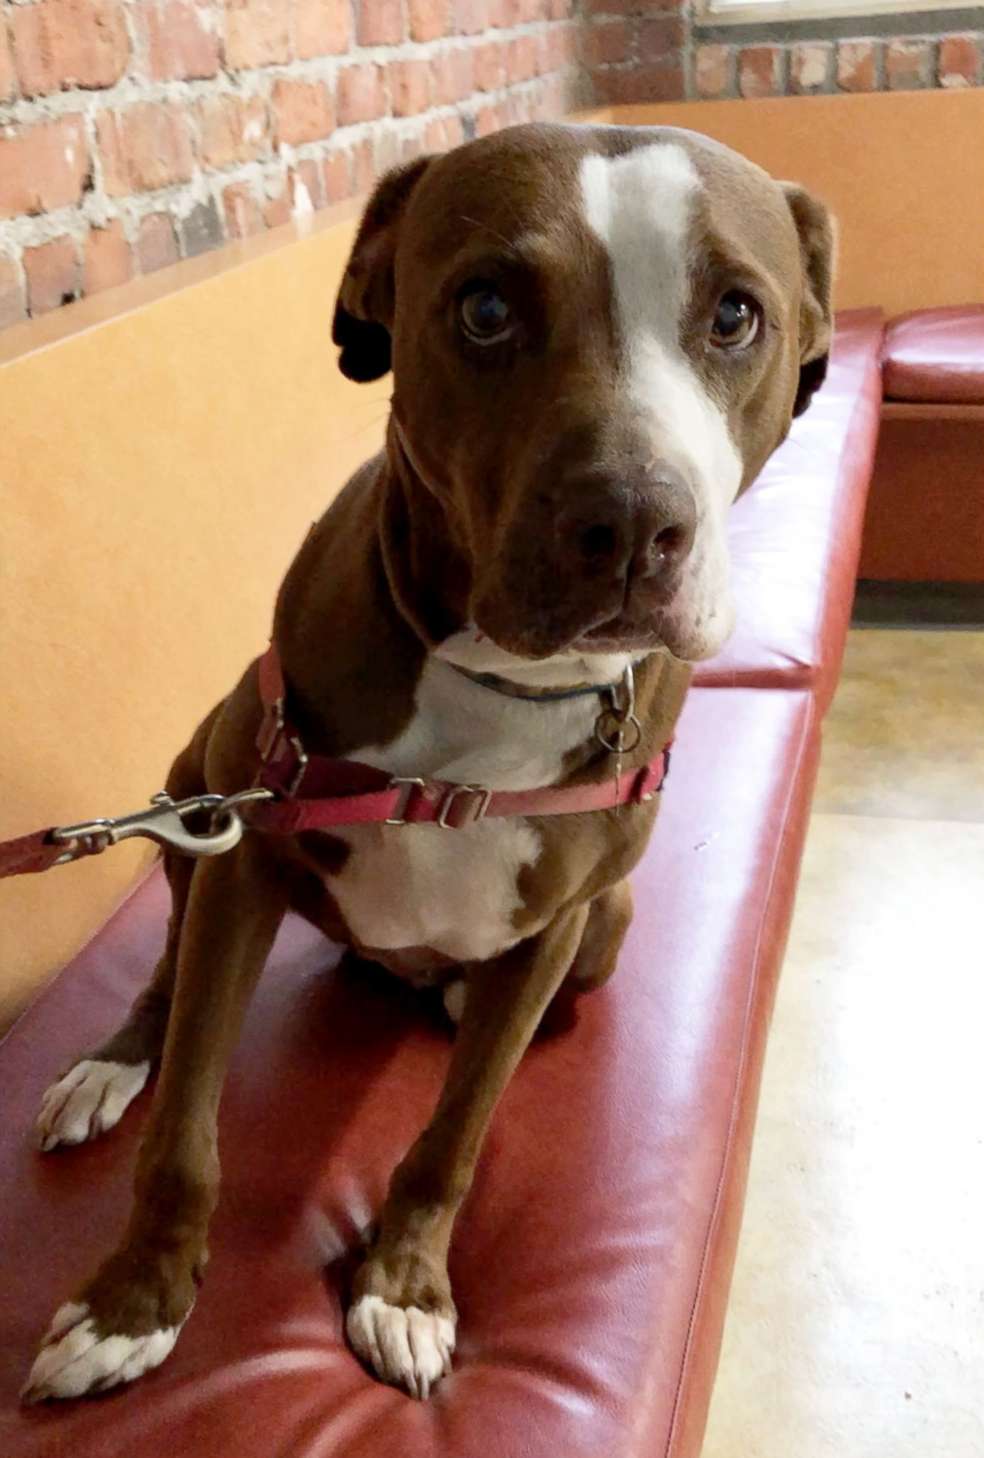 PHOTO: Maizey Klivans attempts to sit up straight while waiting to see the vet after she ate some suspect substances in the park.